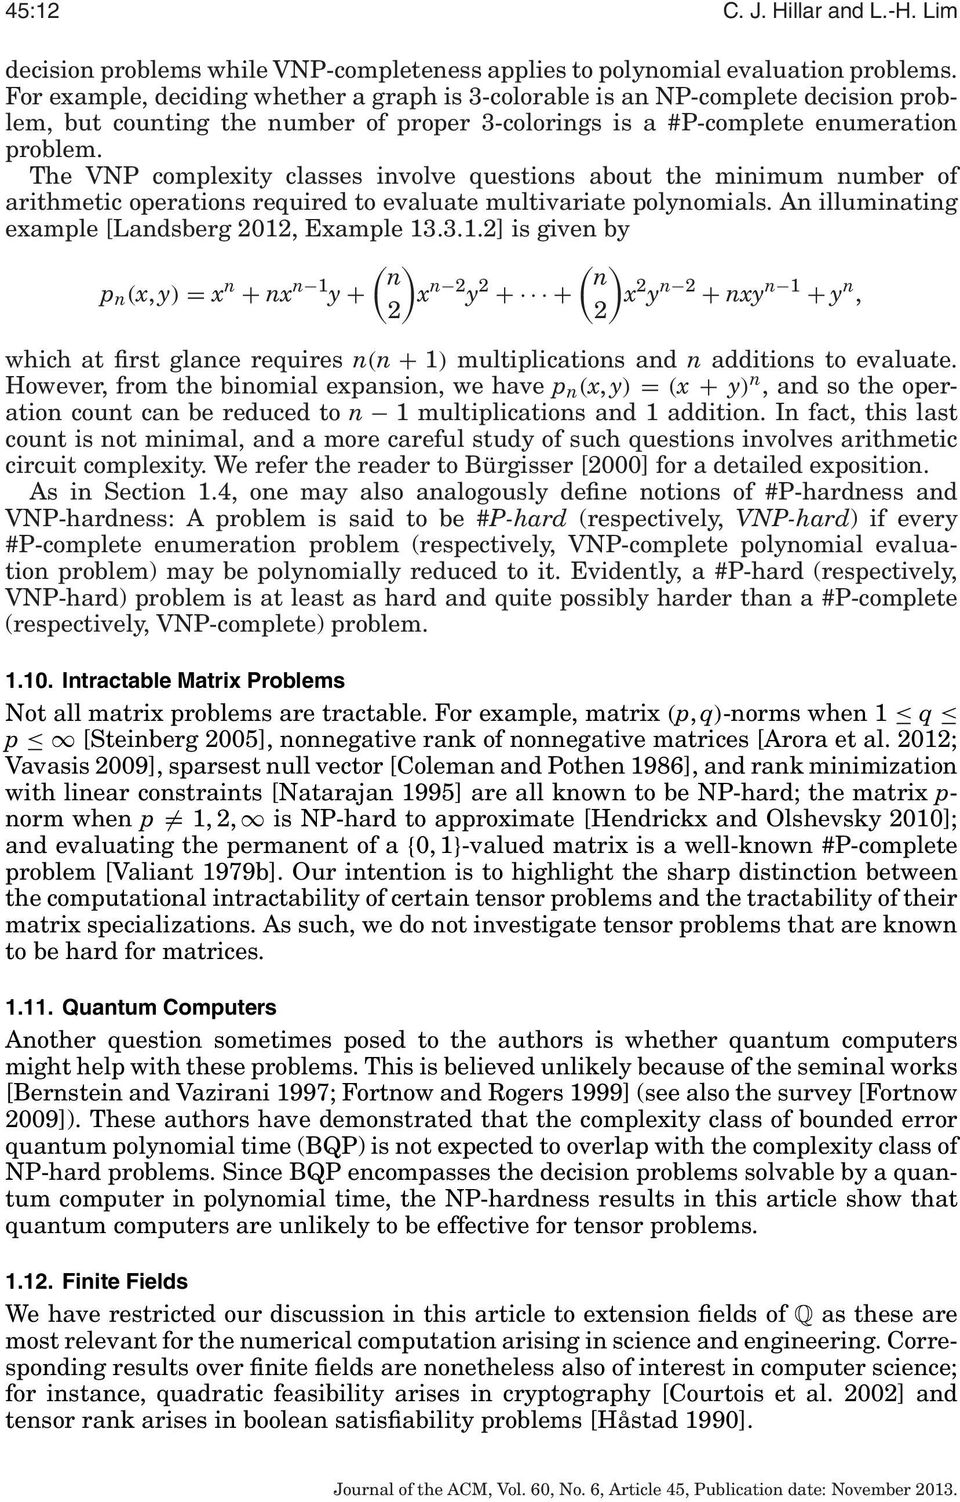 The VNP complexity classes involve questions about the minimum number of arithmetic operations required to evaluate multivariate polynomials. An illuminating example [Landsberg 2012